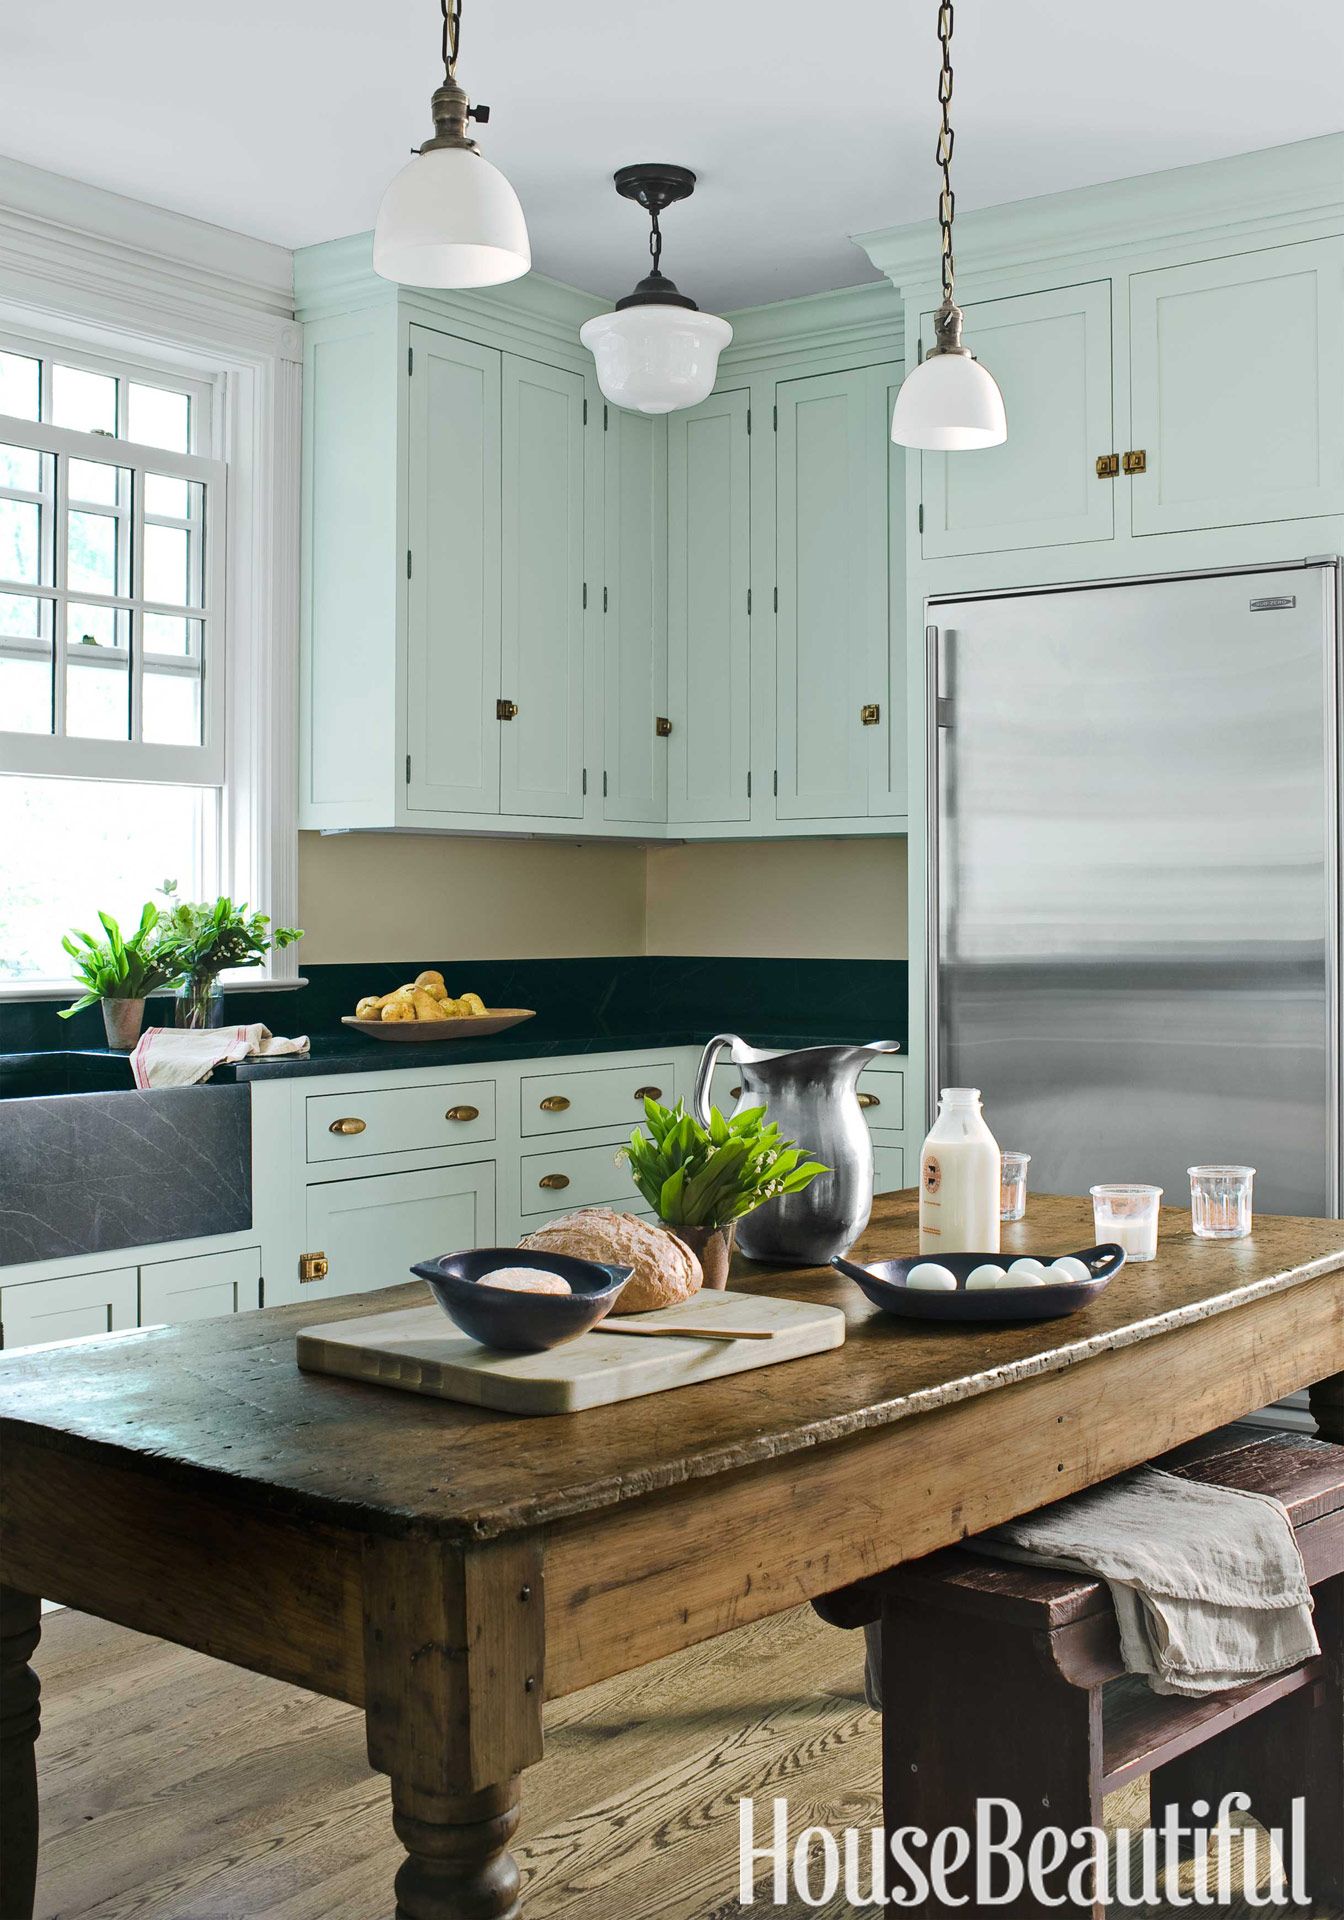 https://hips.hearstapps.com/housebeautiful/assets/cm/15/04/54c0839725ad9_-_01-hbx-shaker-style-kitchen-cabinets-huh-1112-s2.jpg